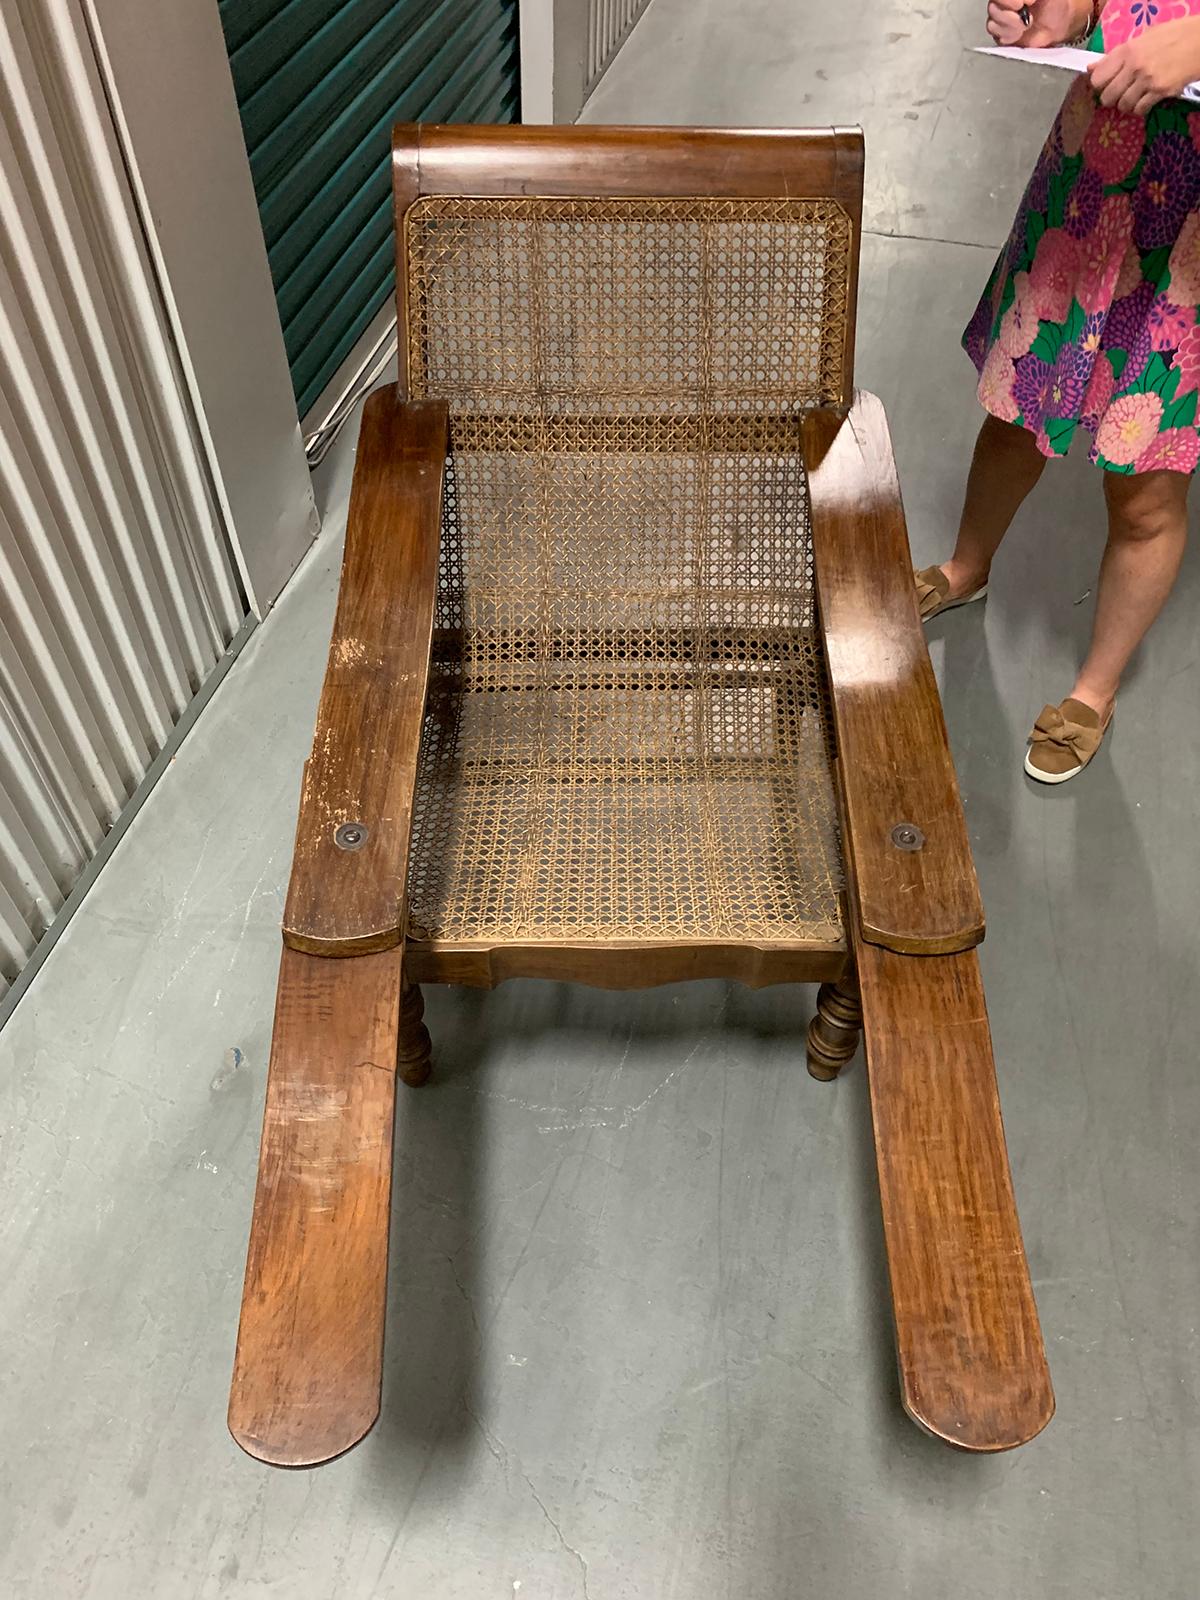 19th-Early 20th Century Anglo-Caribbean Caned Planters Chair with Leg Stretchers 2